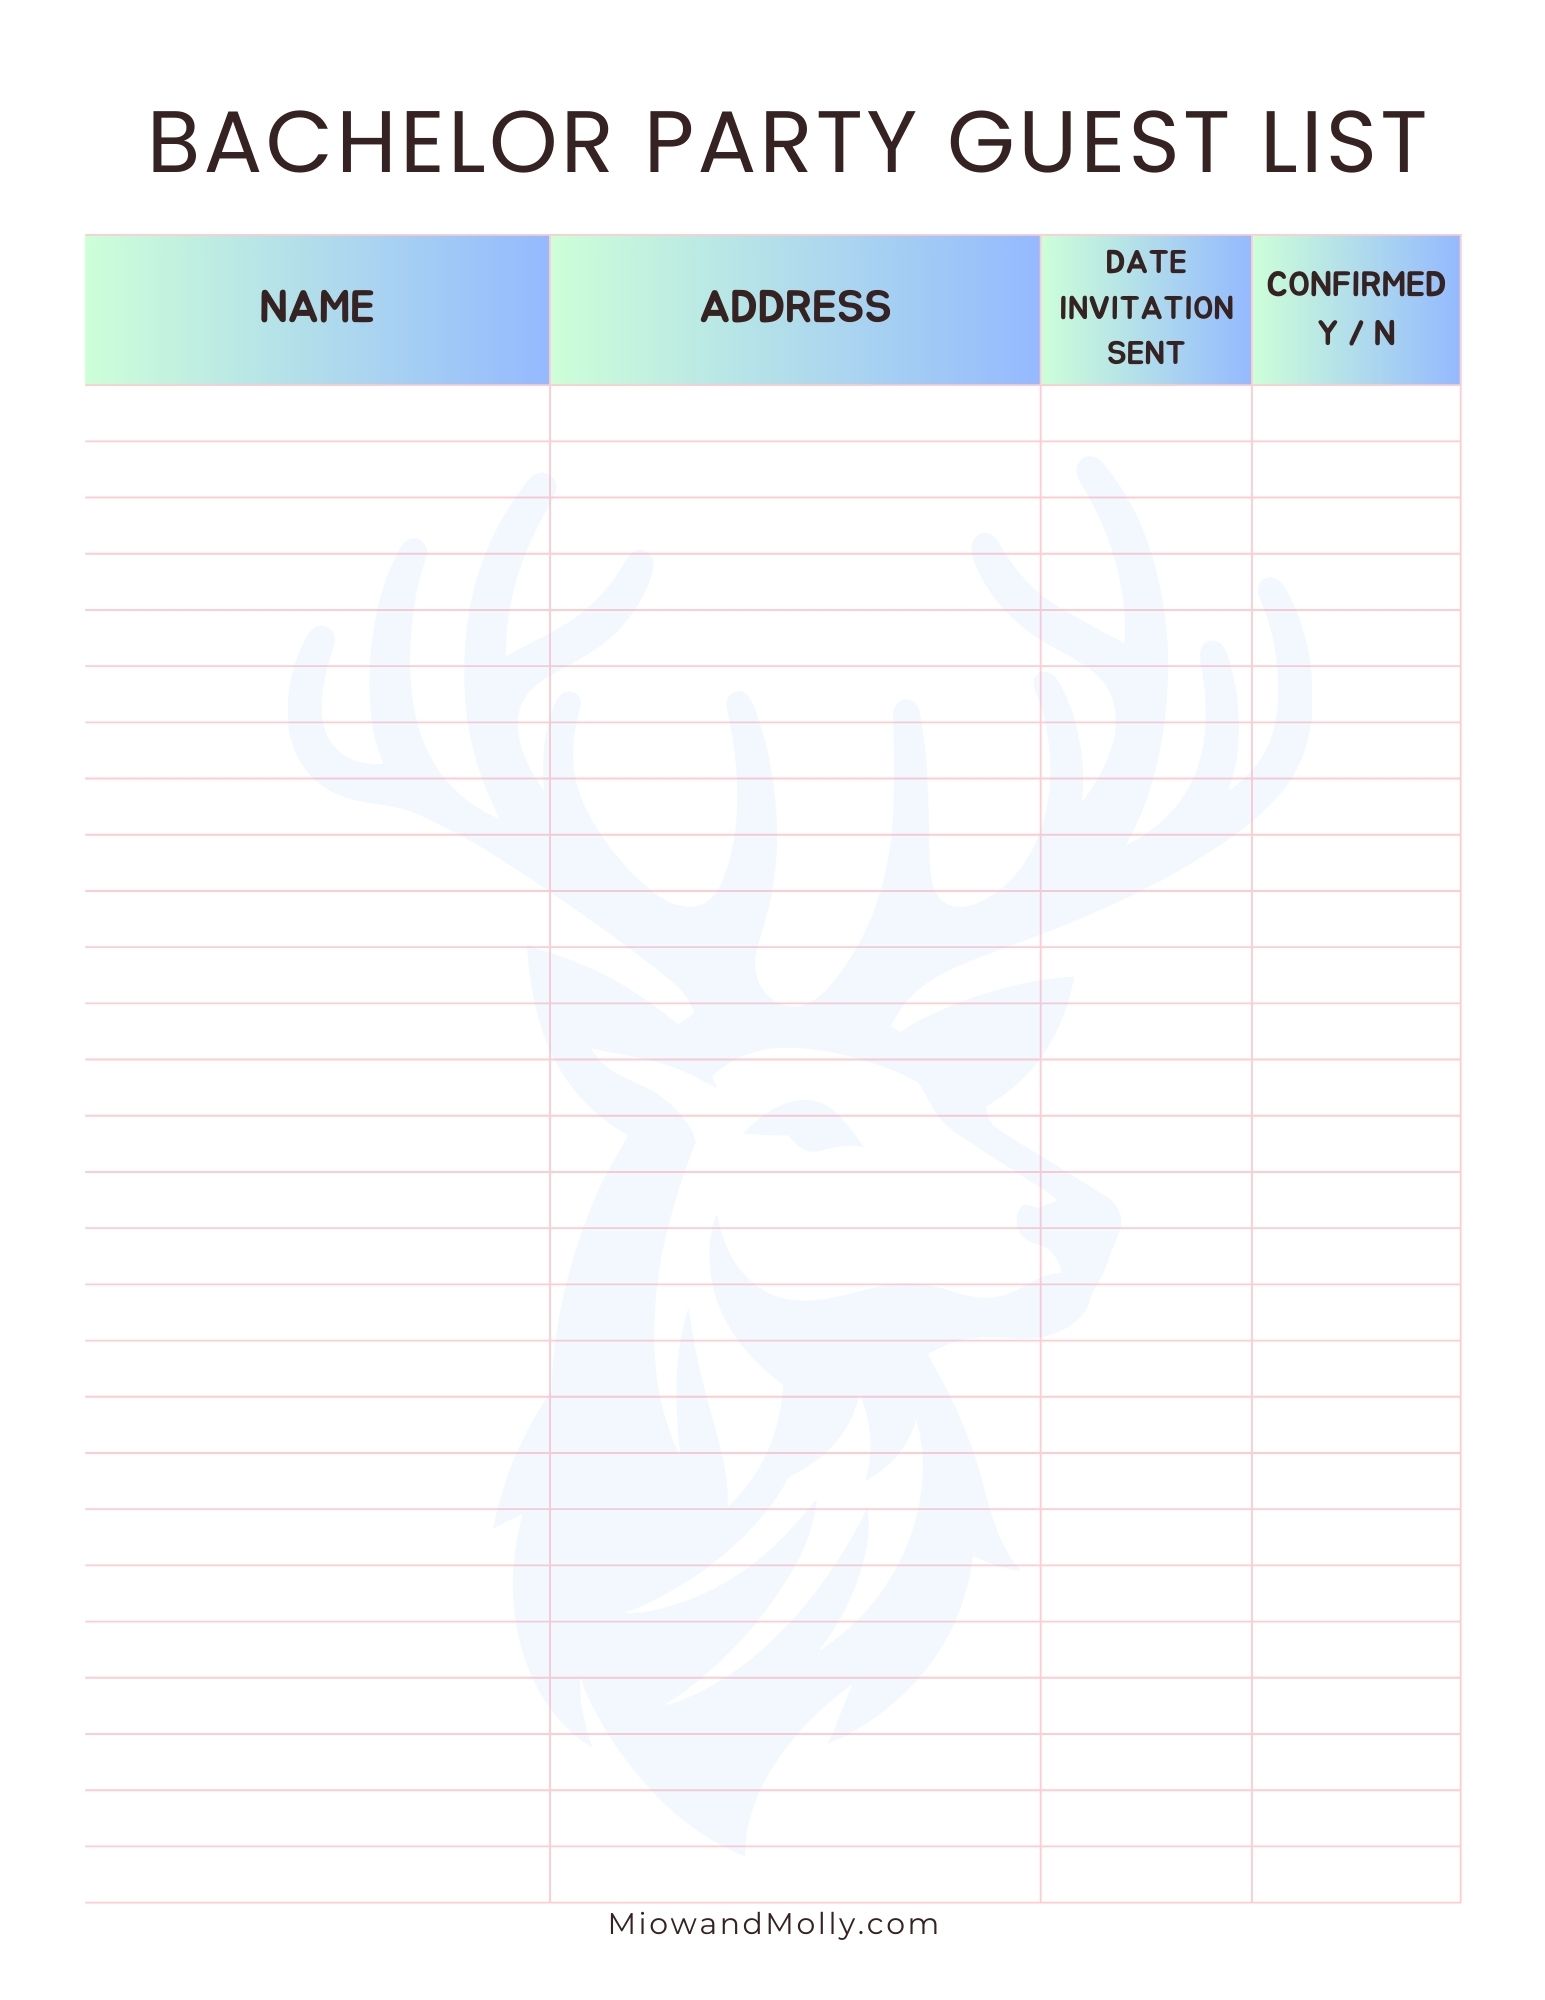 Bachelor party guest list printable